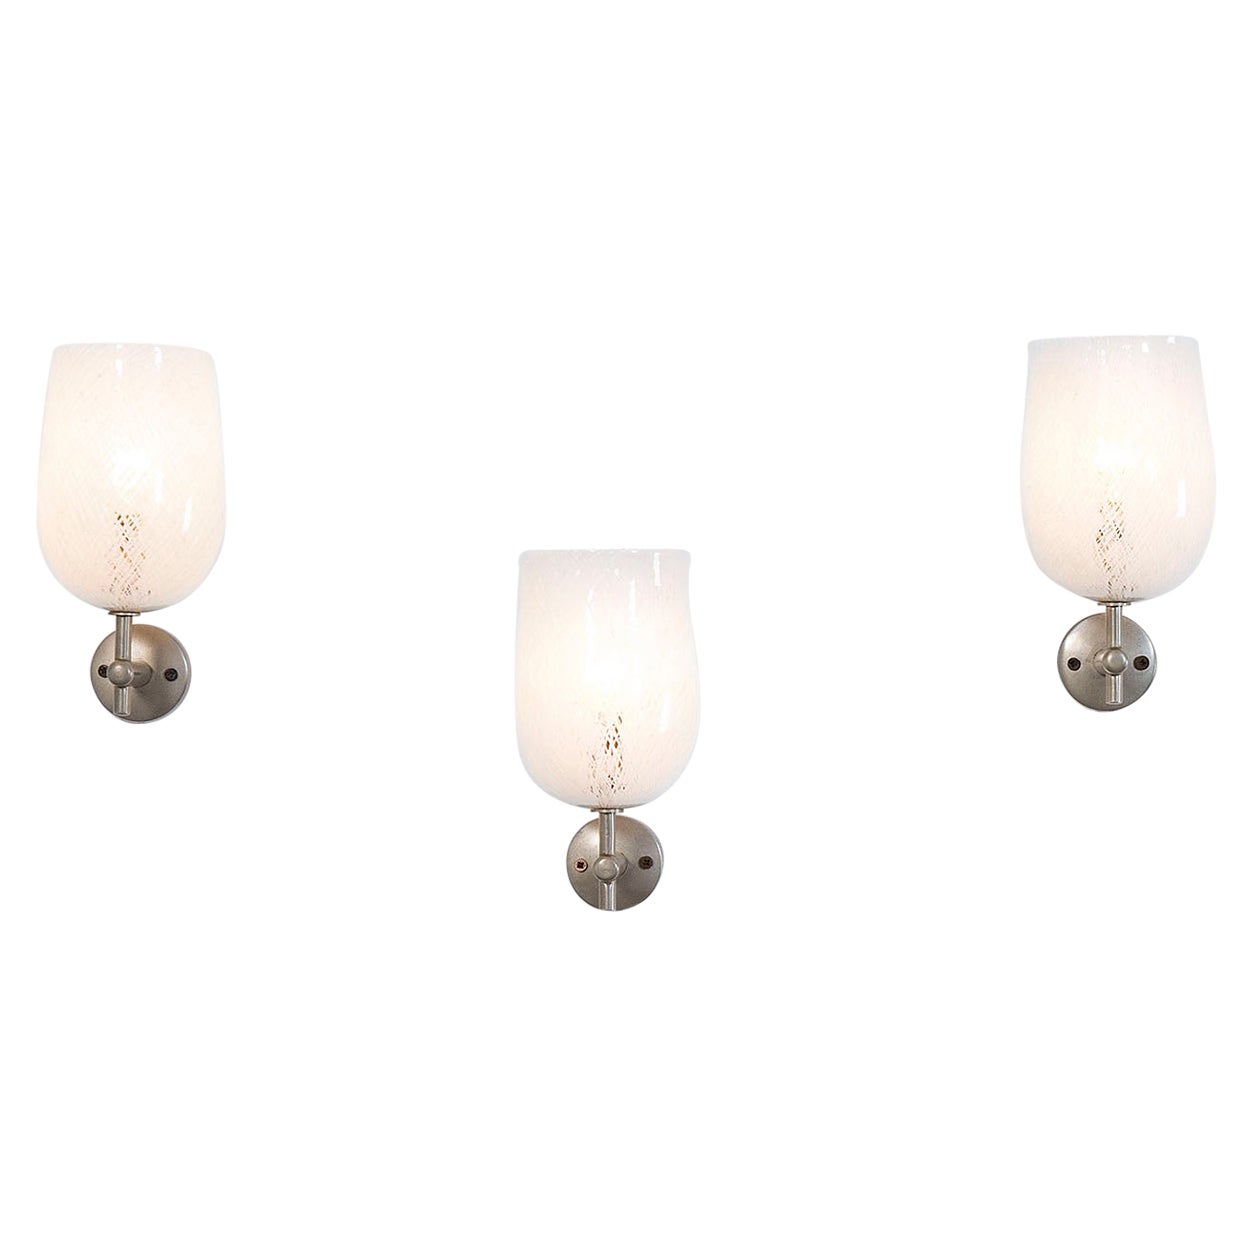 20th Century Venini Set of Three Wall Lamps in Murano Glass and Chrome, 50s